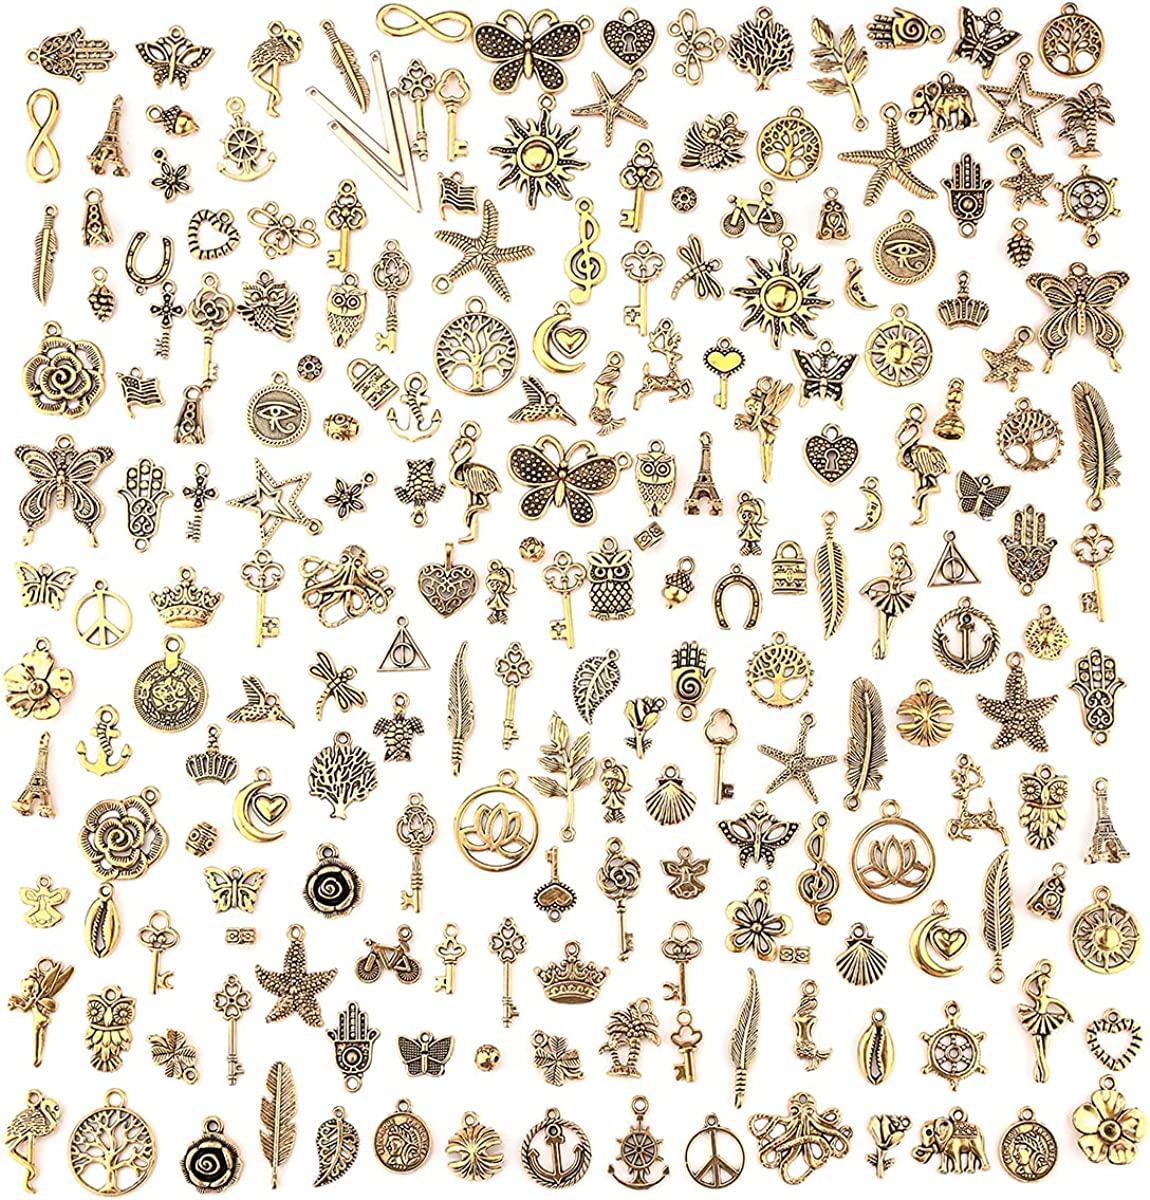 Wholesale Bulk 50pcs Mixed Gold Charms Pendants Diy For Necklace Bracelet  Jewelry Making And Crafting